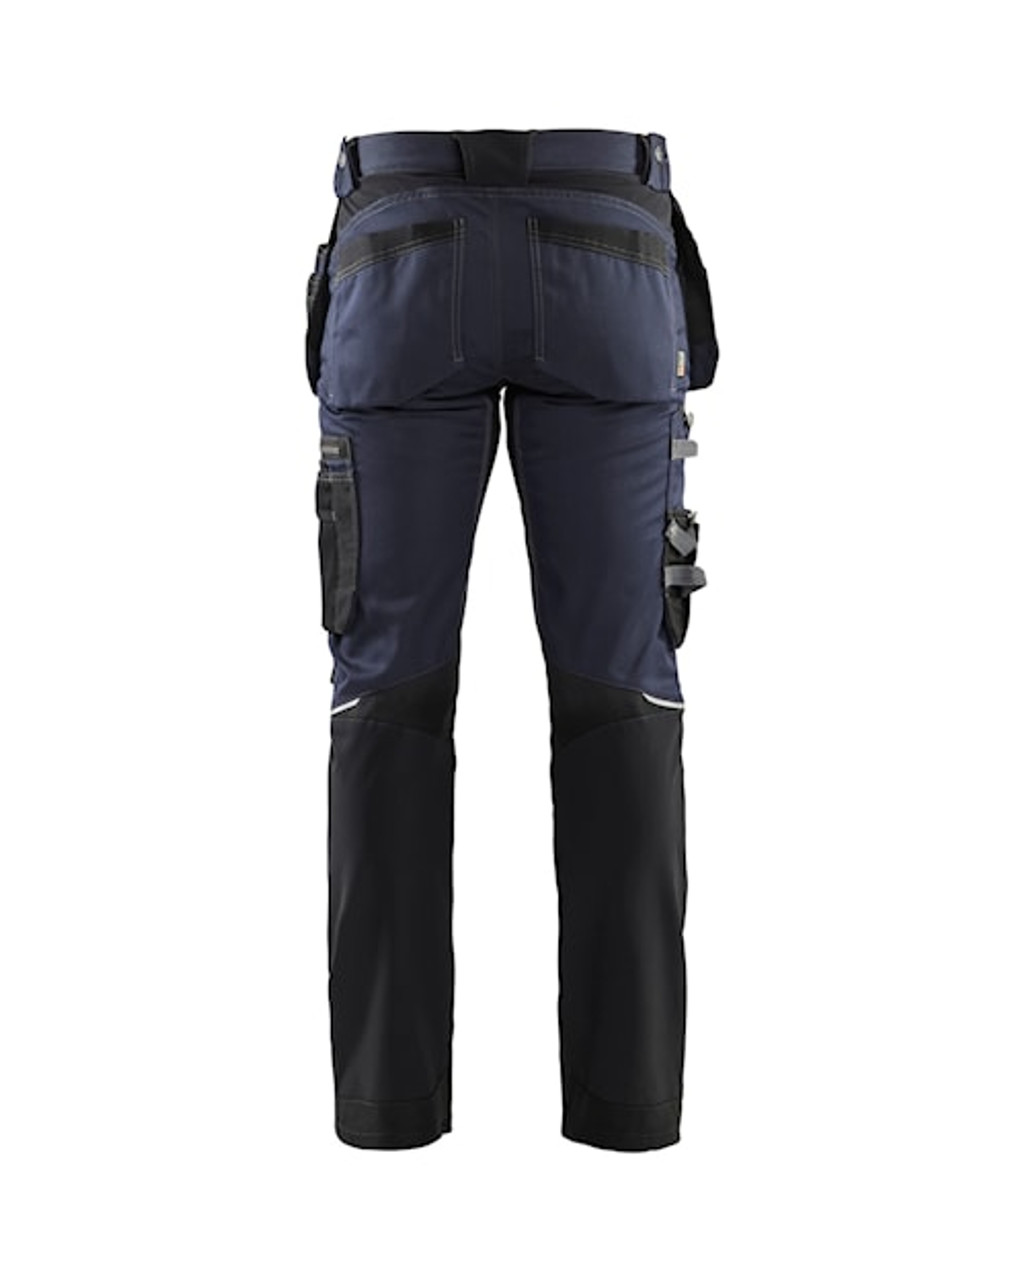 BLAKLADER Work Pants  | Buy online Trousers 1599 for Work Trousers and Work Pants with Holster Pockets in Melbourne, Hobart and Sydney